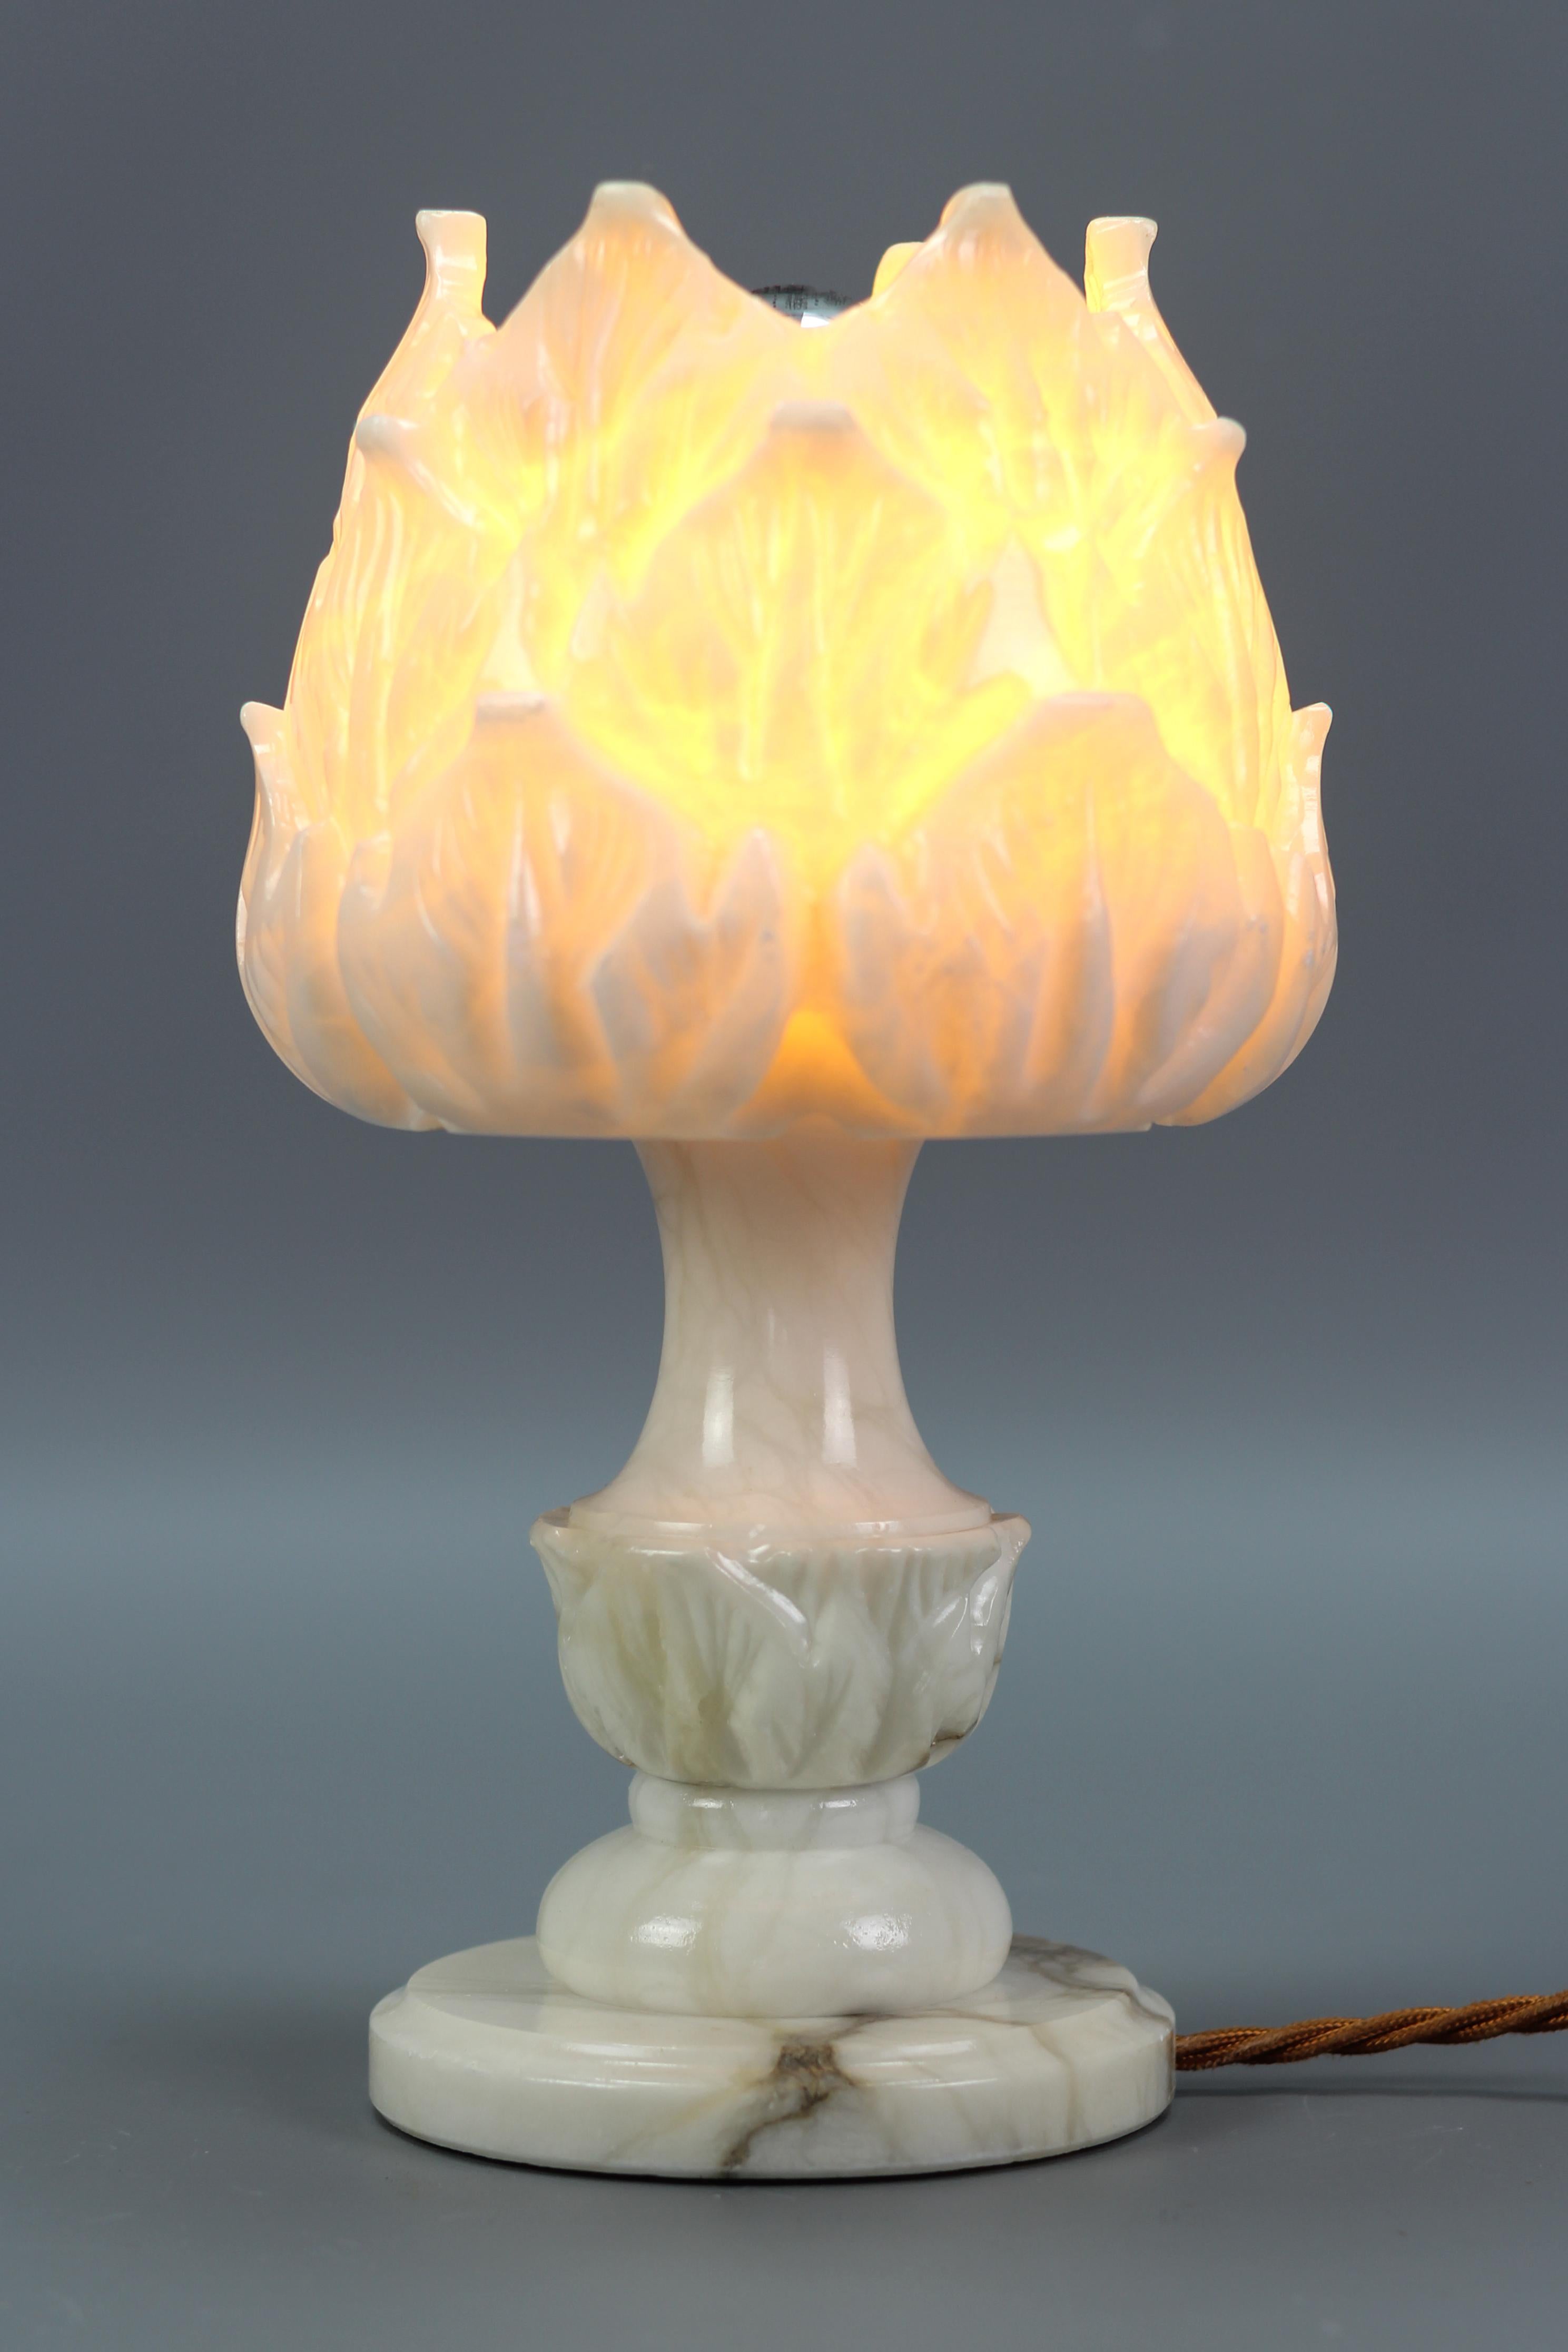 Italian mid-century flower-shaped white alabaster table lamp or mood lamp, from the circa 1950s.
Absolutely adorable white/ivory color alabaster table lamp or mood lamp in a shape of a flower with some dark brown and black veins. 
The light shining